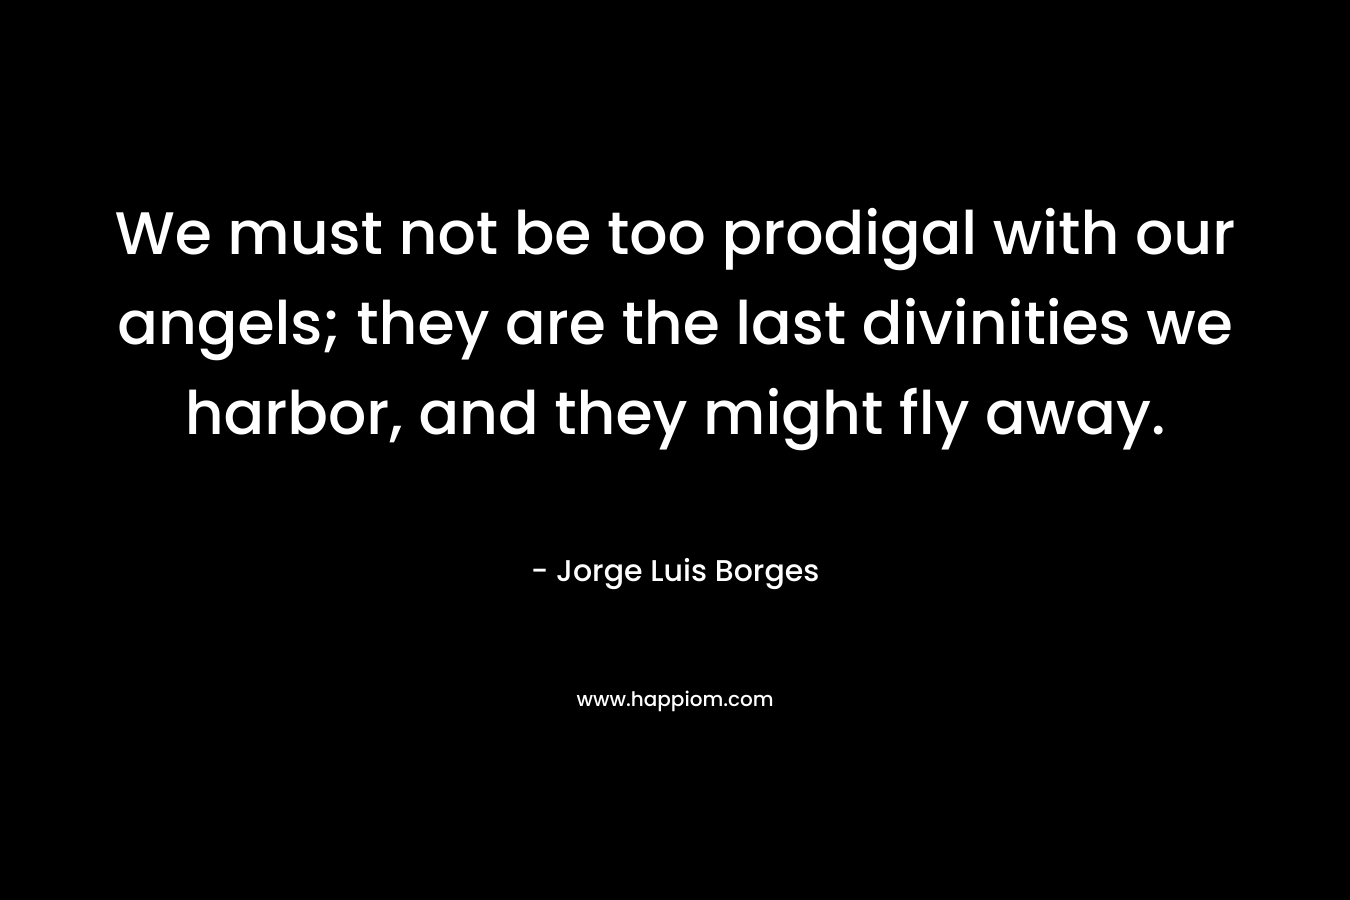 We must not be too prodigal with our angels; they are the last divinities we harbor, and they might fly away. – Jorge Luis Borges